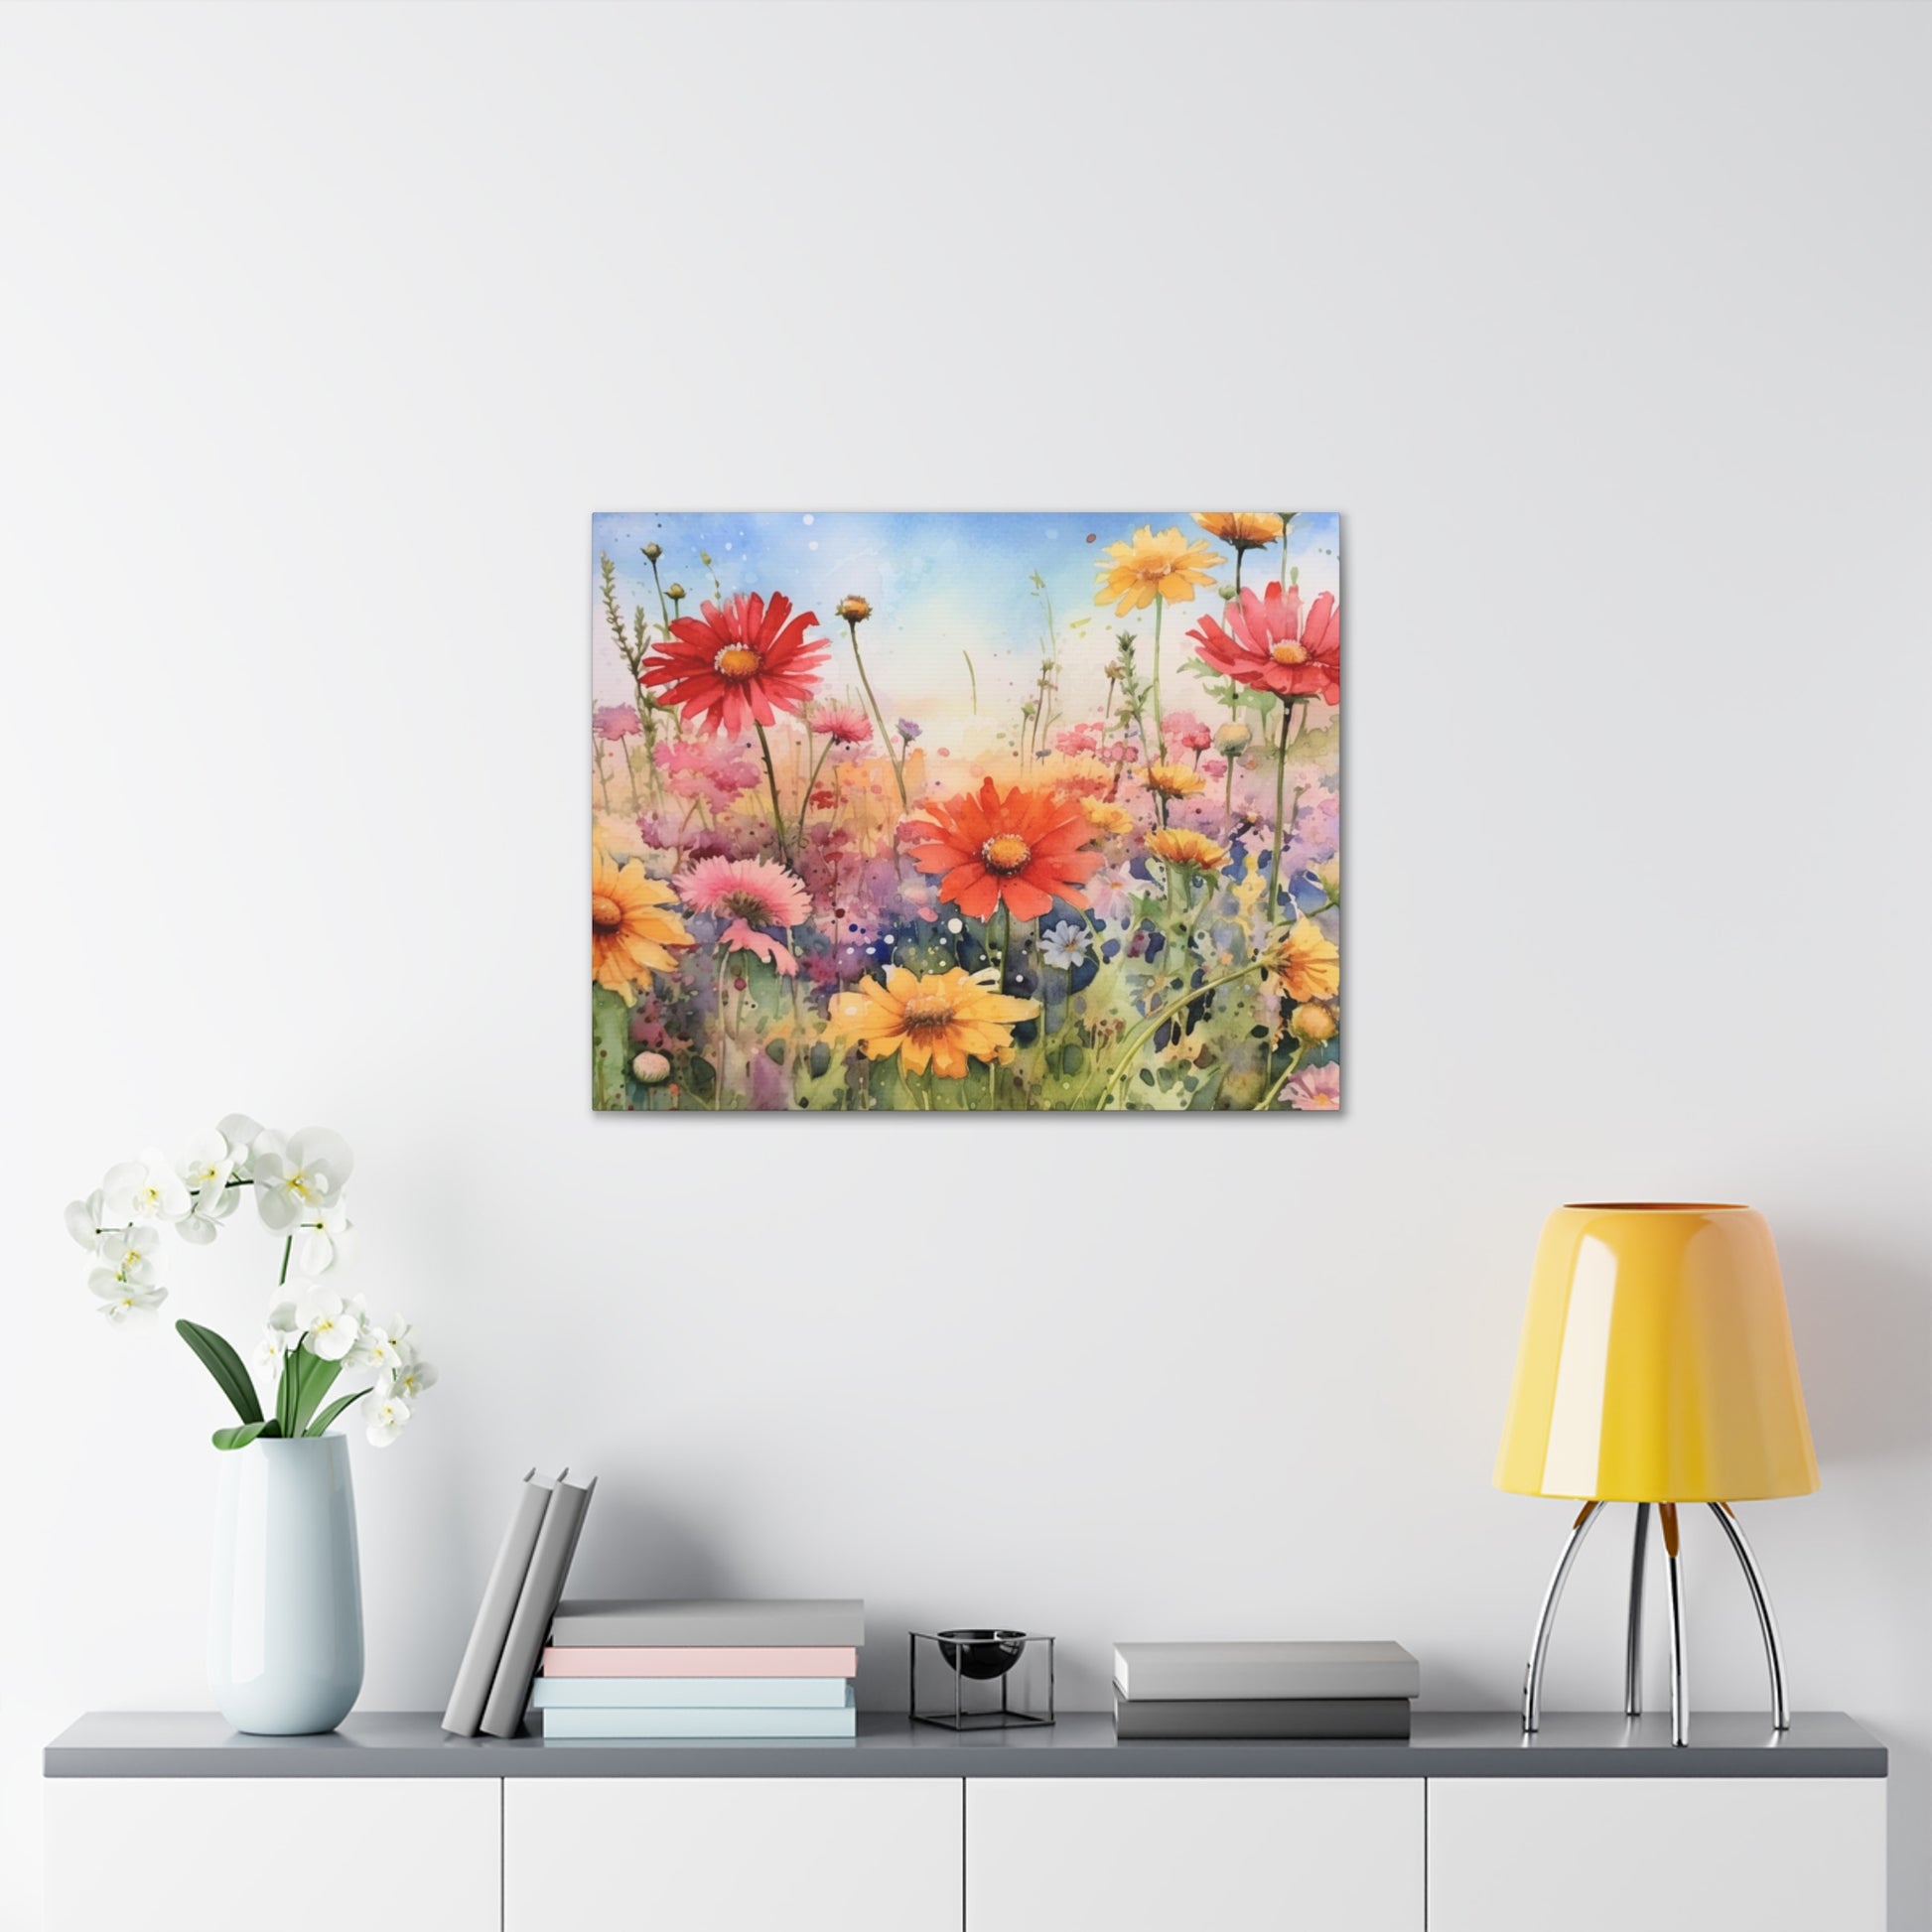 Wildflowers Canvas Gallery Wrap, Watercolor Floral Field Wall Art Print Decor Small Large Hanging Modern Landscape Living Room Starcove Fashion